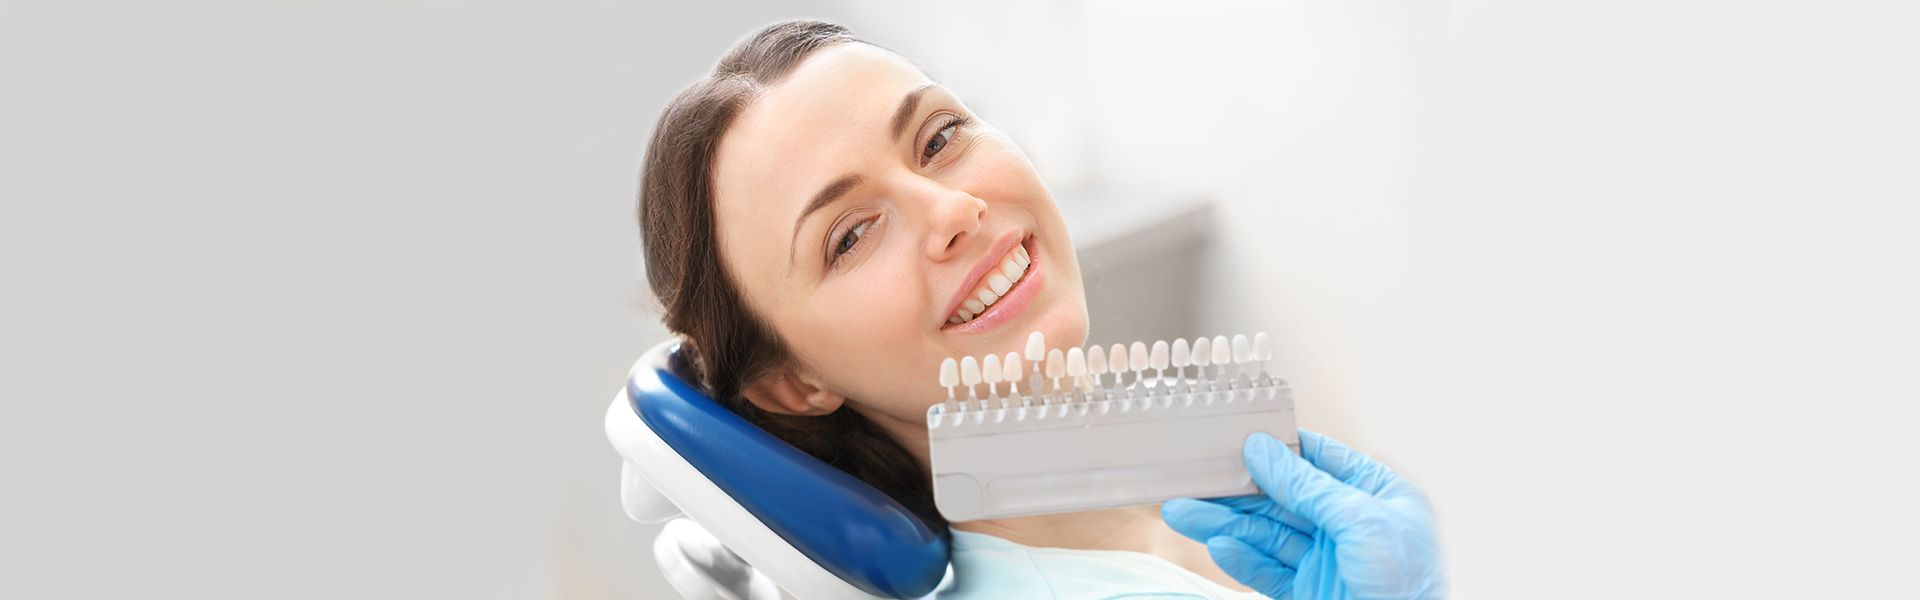 Porcelain Veneers or Composite: Which Is the Better Option?